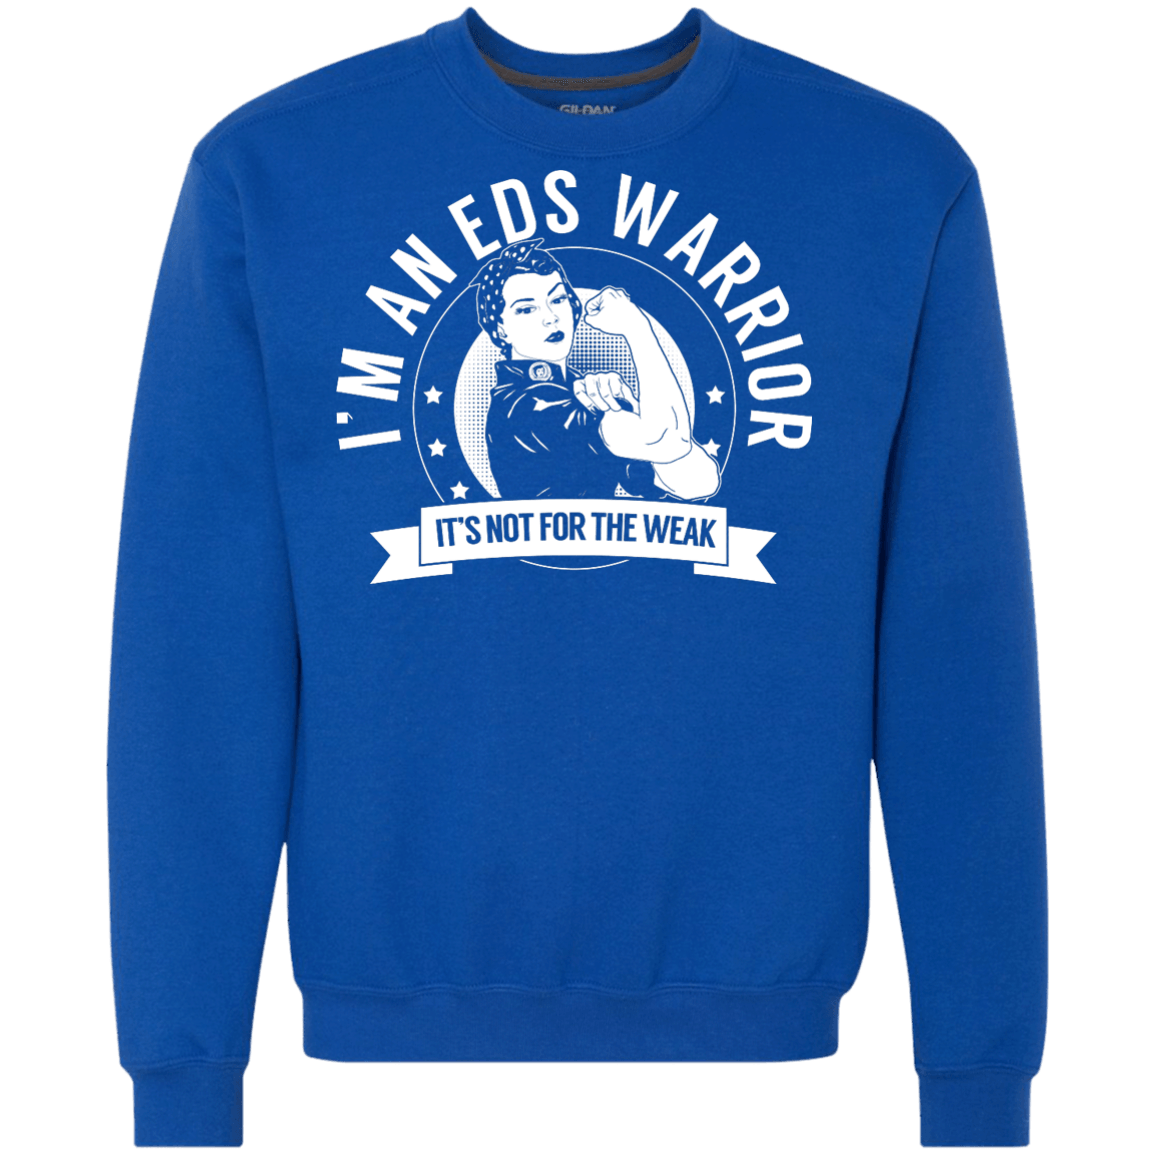 Ehlers Danlos Syndrome - EDS Warrior Not for the Weak Crewneck Sweatshirt 9 oz. - The Unchargeables